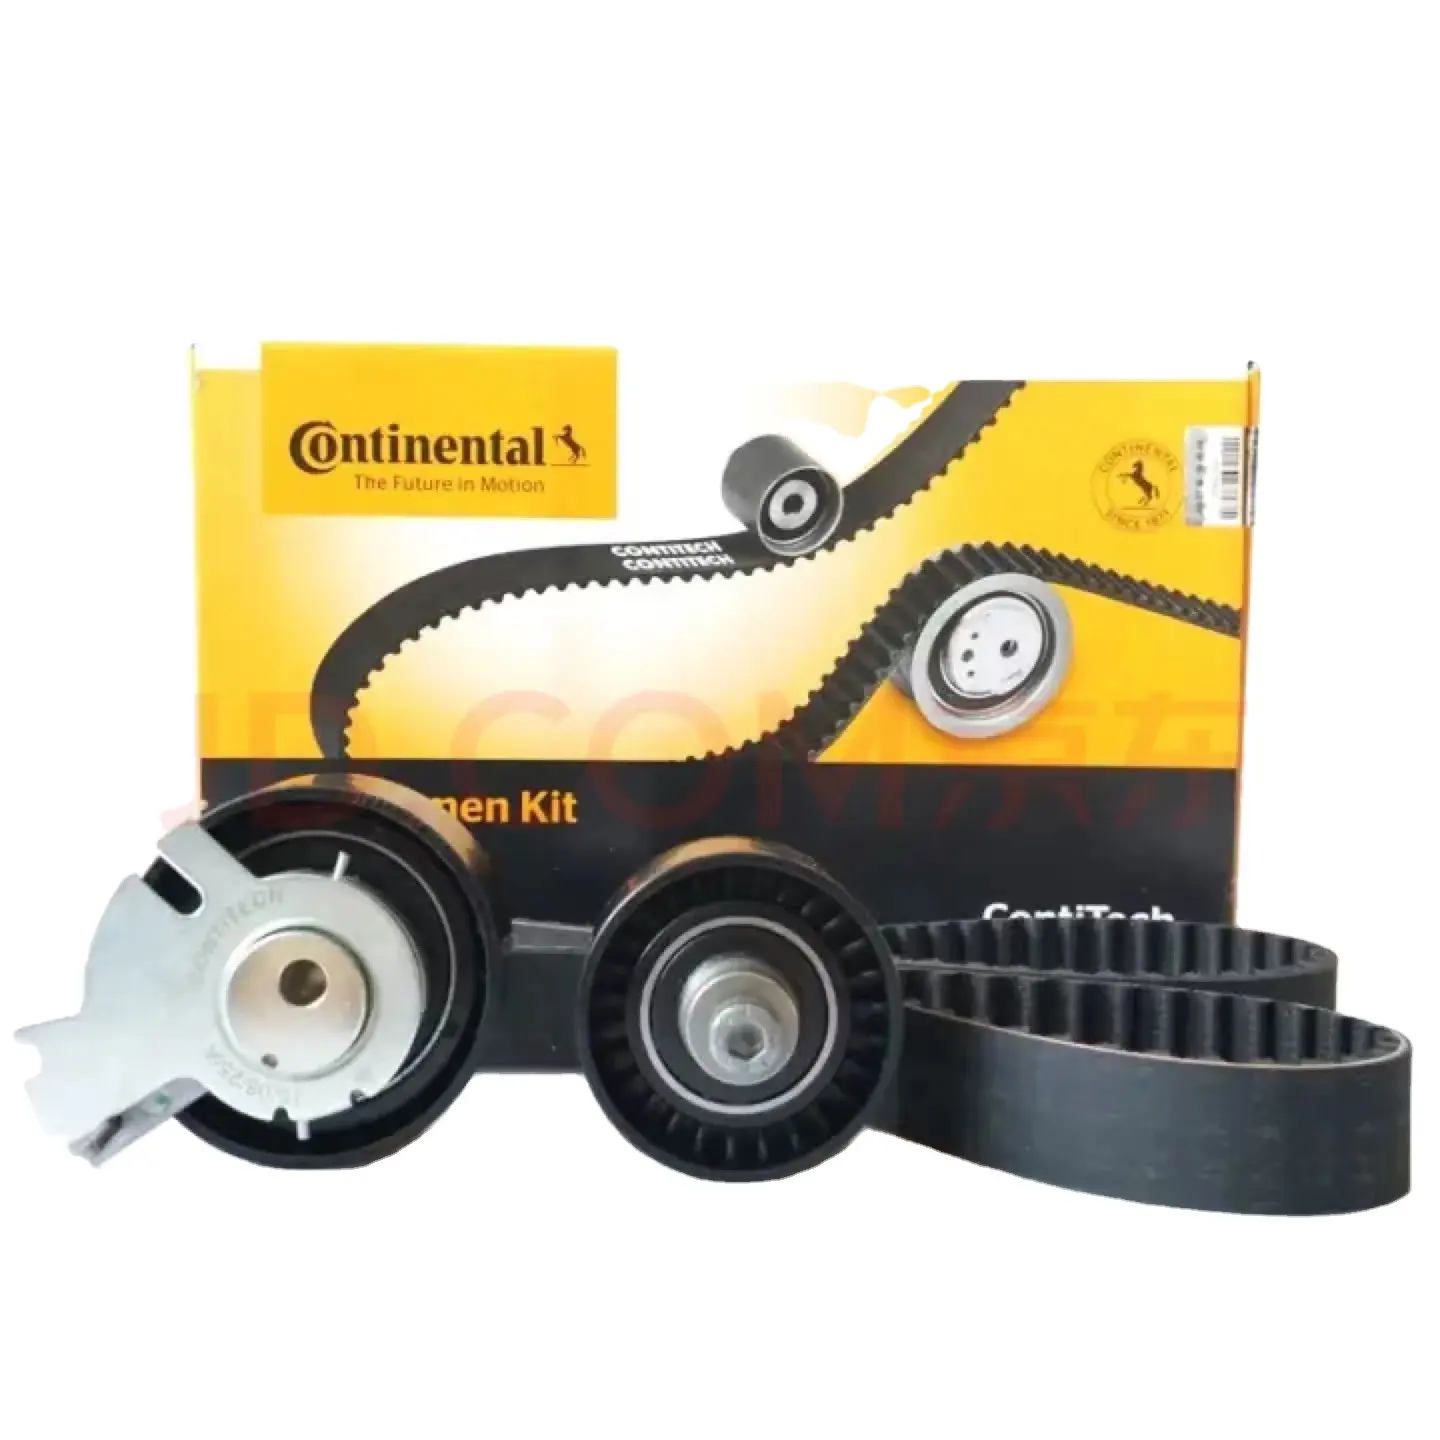 Auto Engine Timing Belt Repair Kit Continental CT1222K2CT for Great Wall Wingle 5 6 Hover Haval H3 H5 4G64 Chery Tiggo 2.4